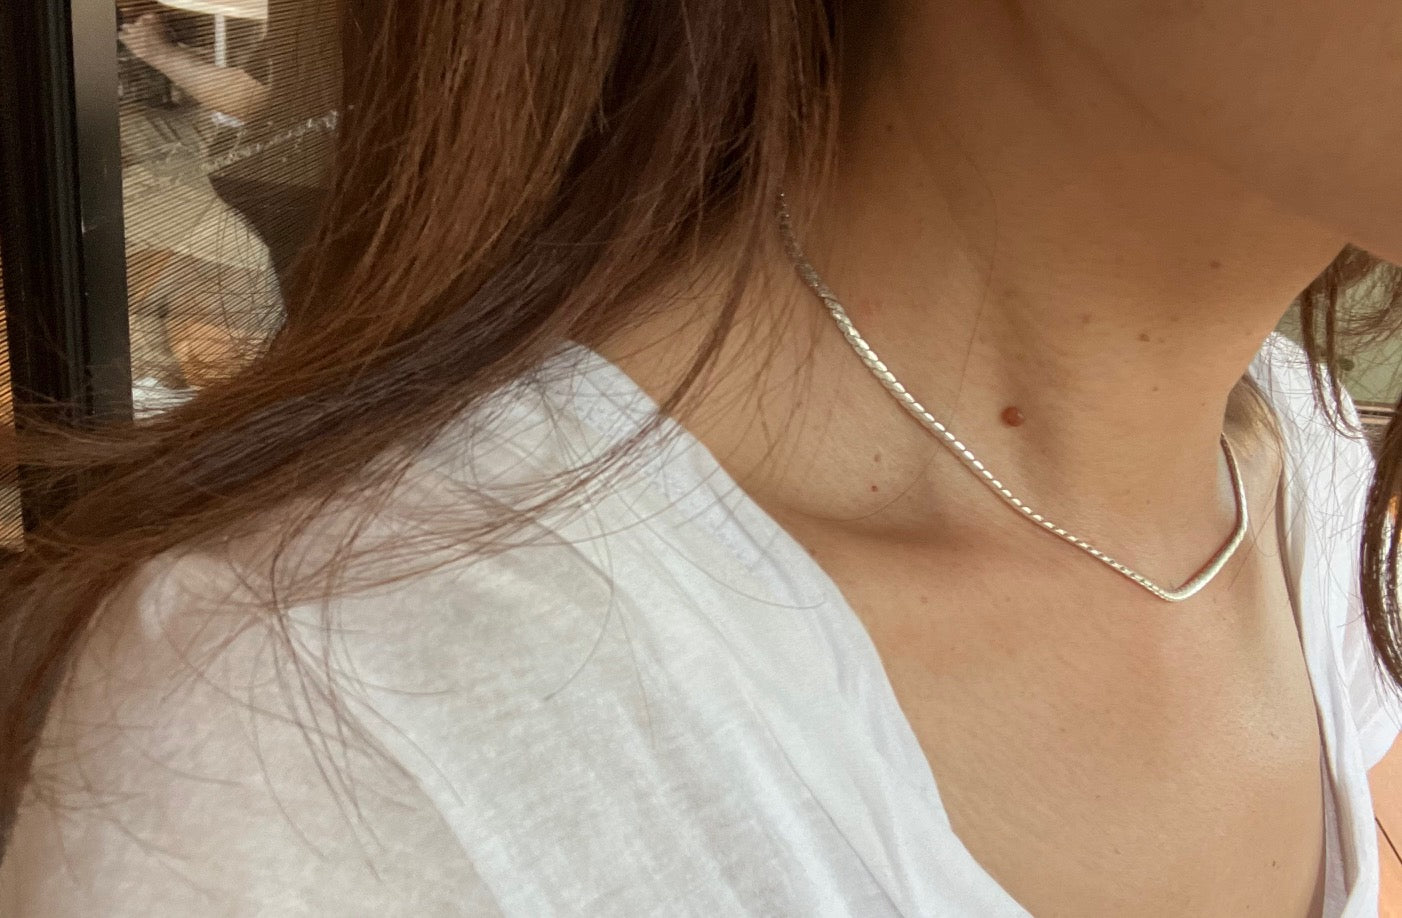 Sterling Silver925 Swage / Twist Chain Necklace / Choker For Men & Women スネーク スエッジ チェーンネックレス ユニセックス